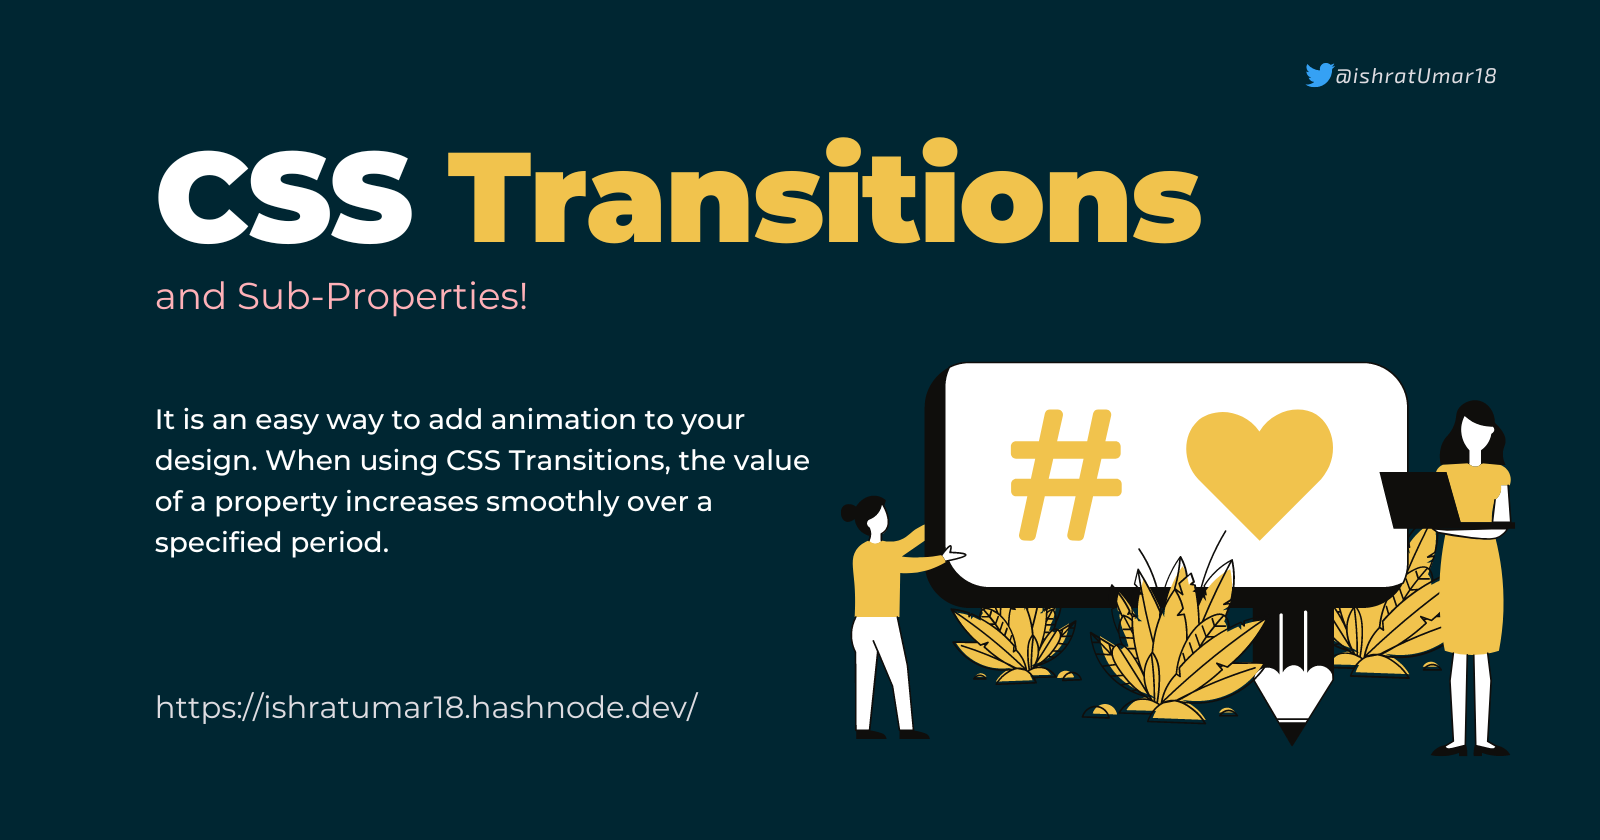 An Introduction to CSS Transitions!